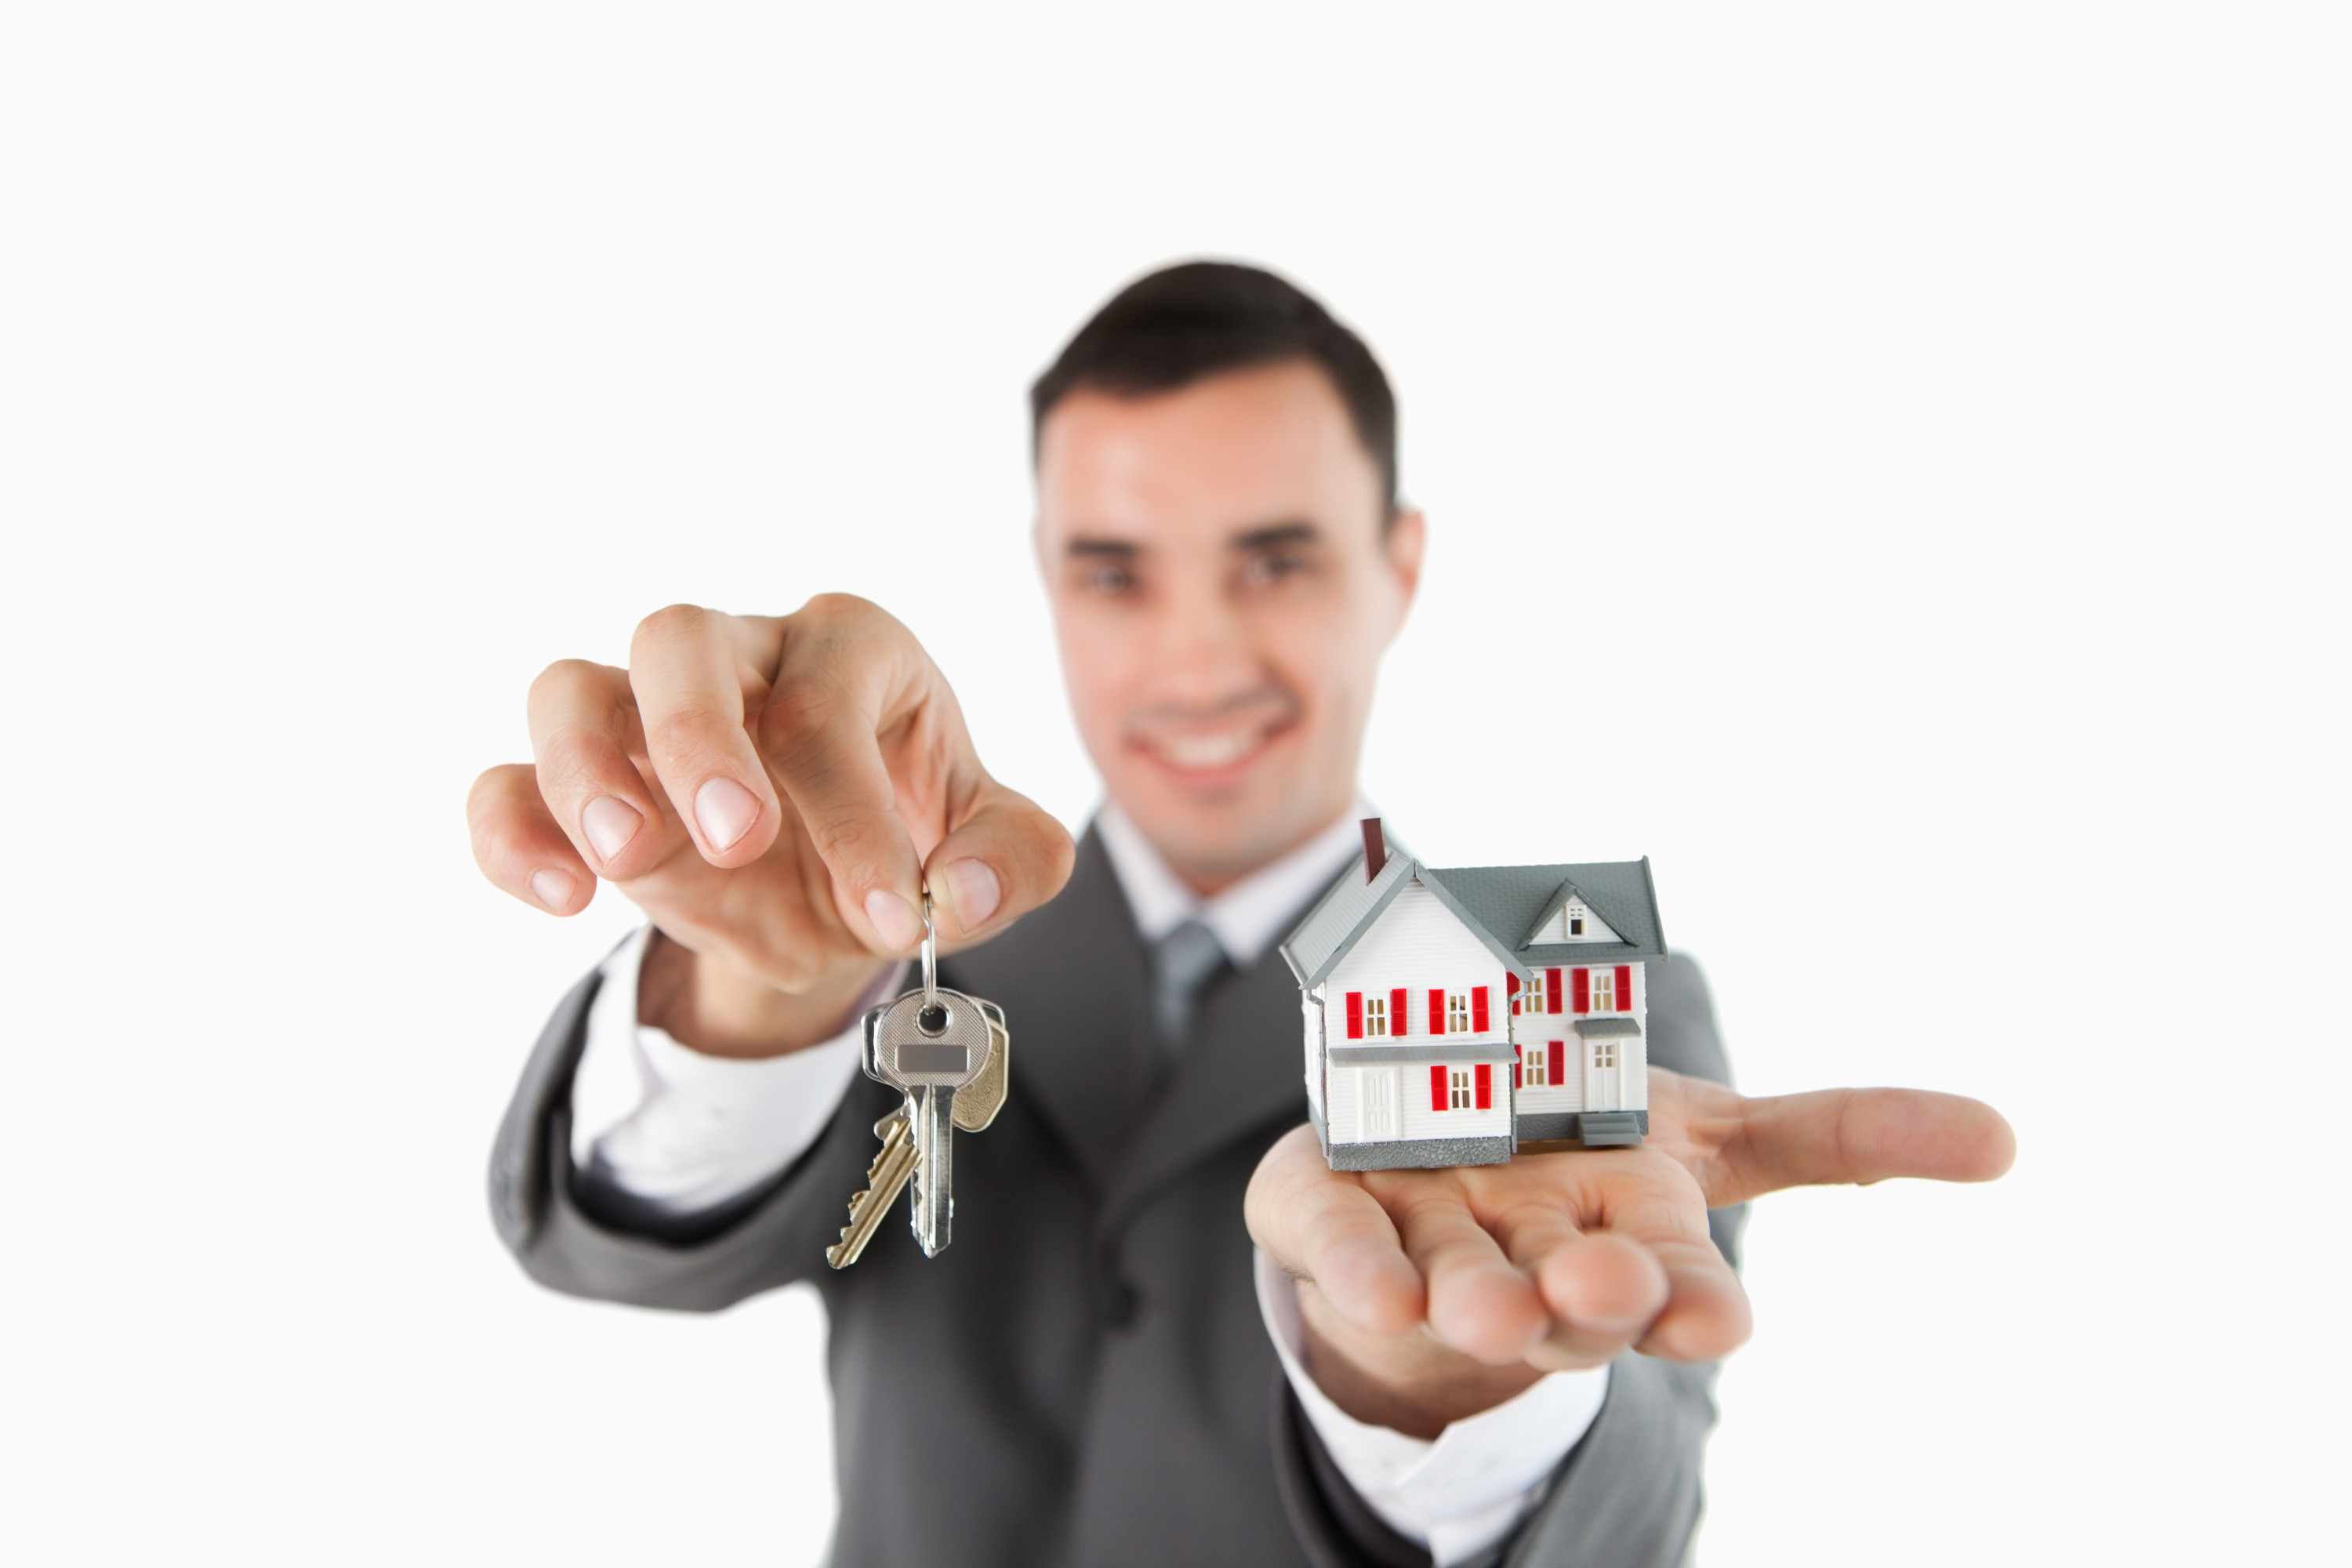 Why hire a Realtor?